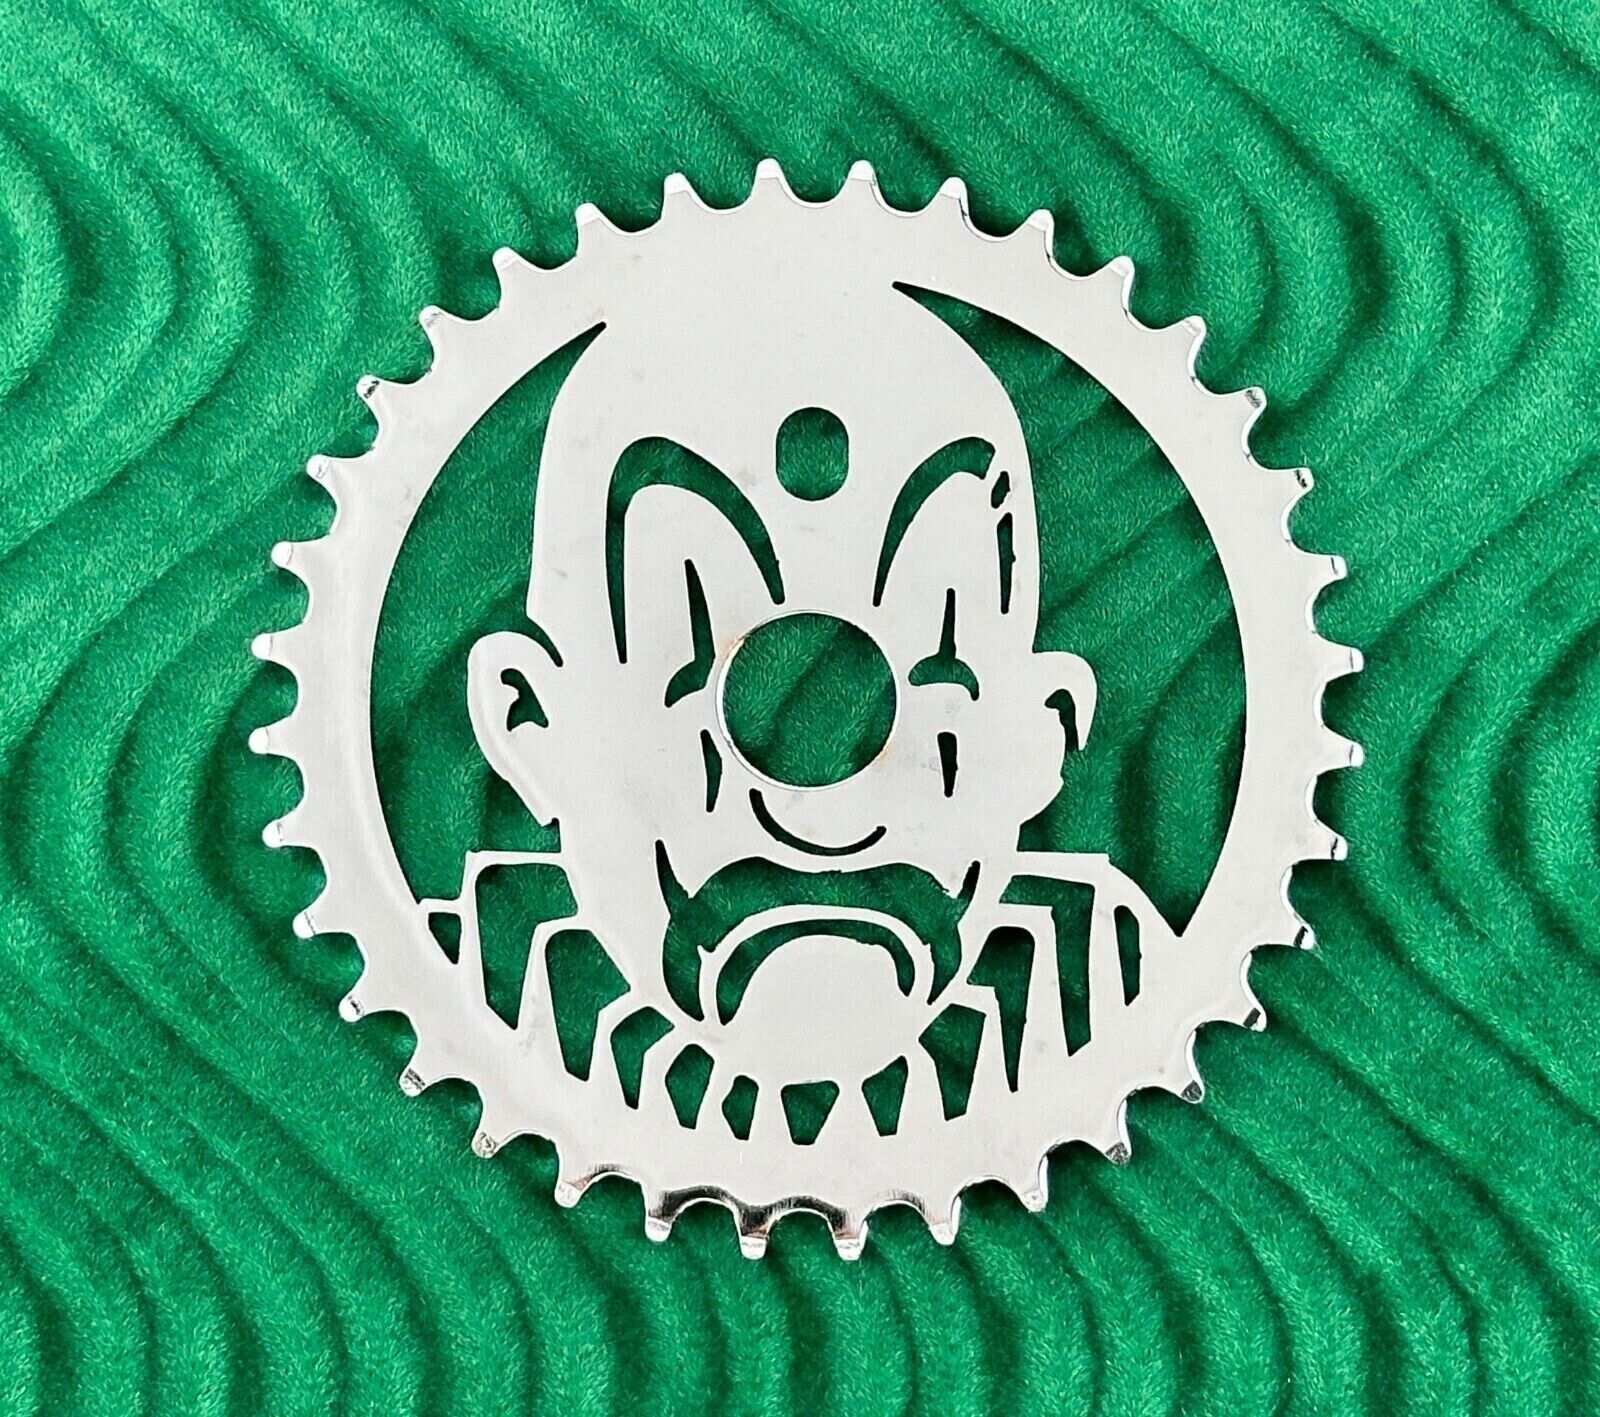 CUSTOM LASER CUT CLOWN STYLE 36T SPROCKET FOR ALL SIZE BIKES.